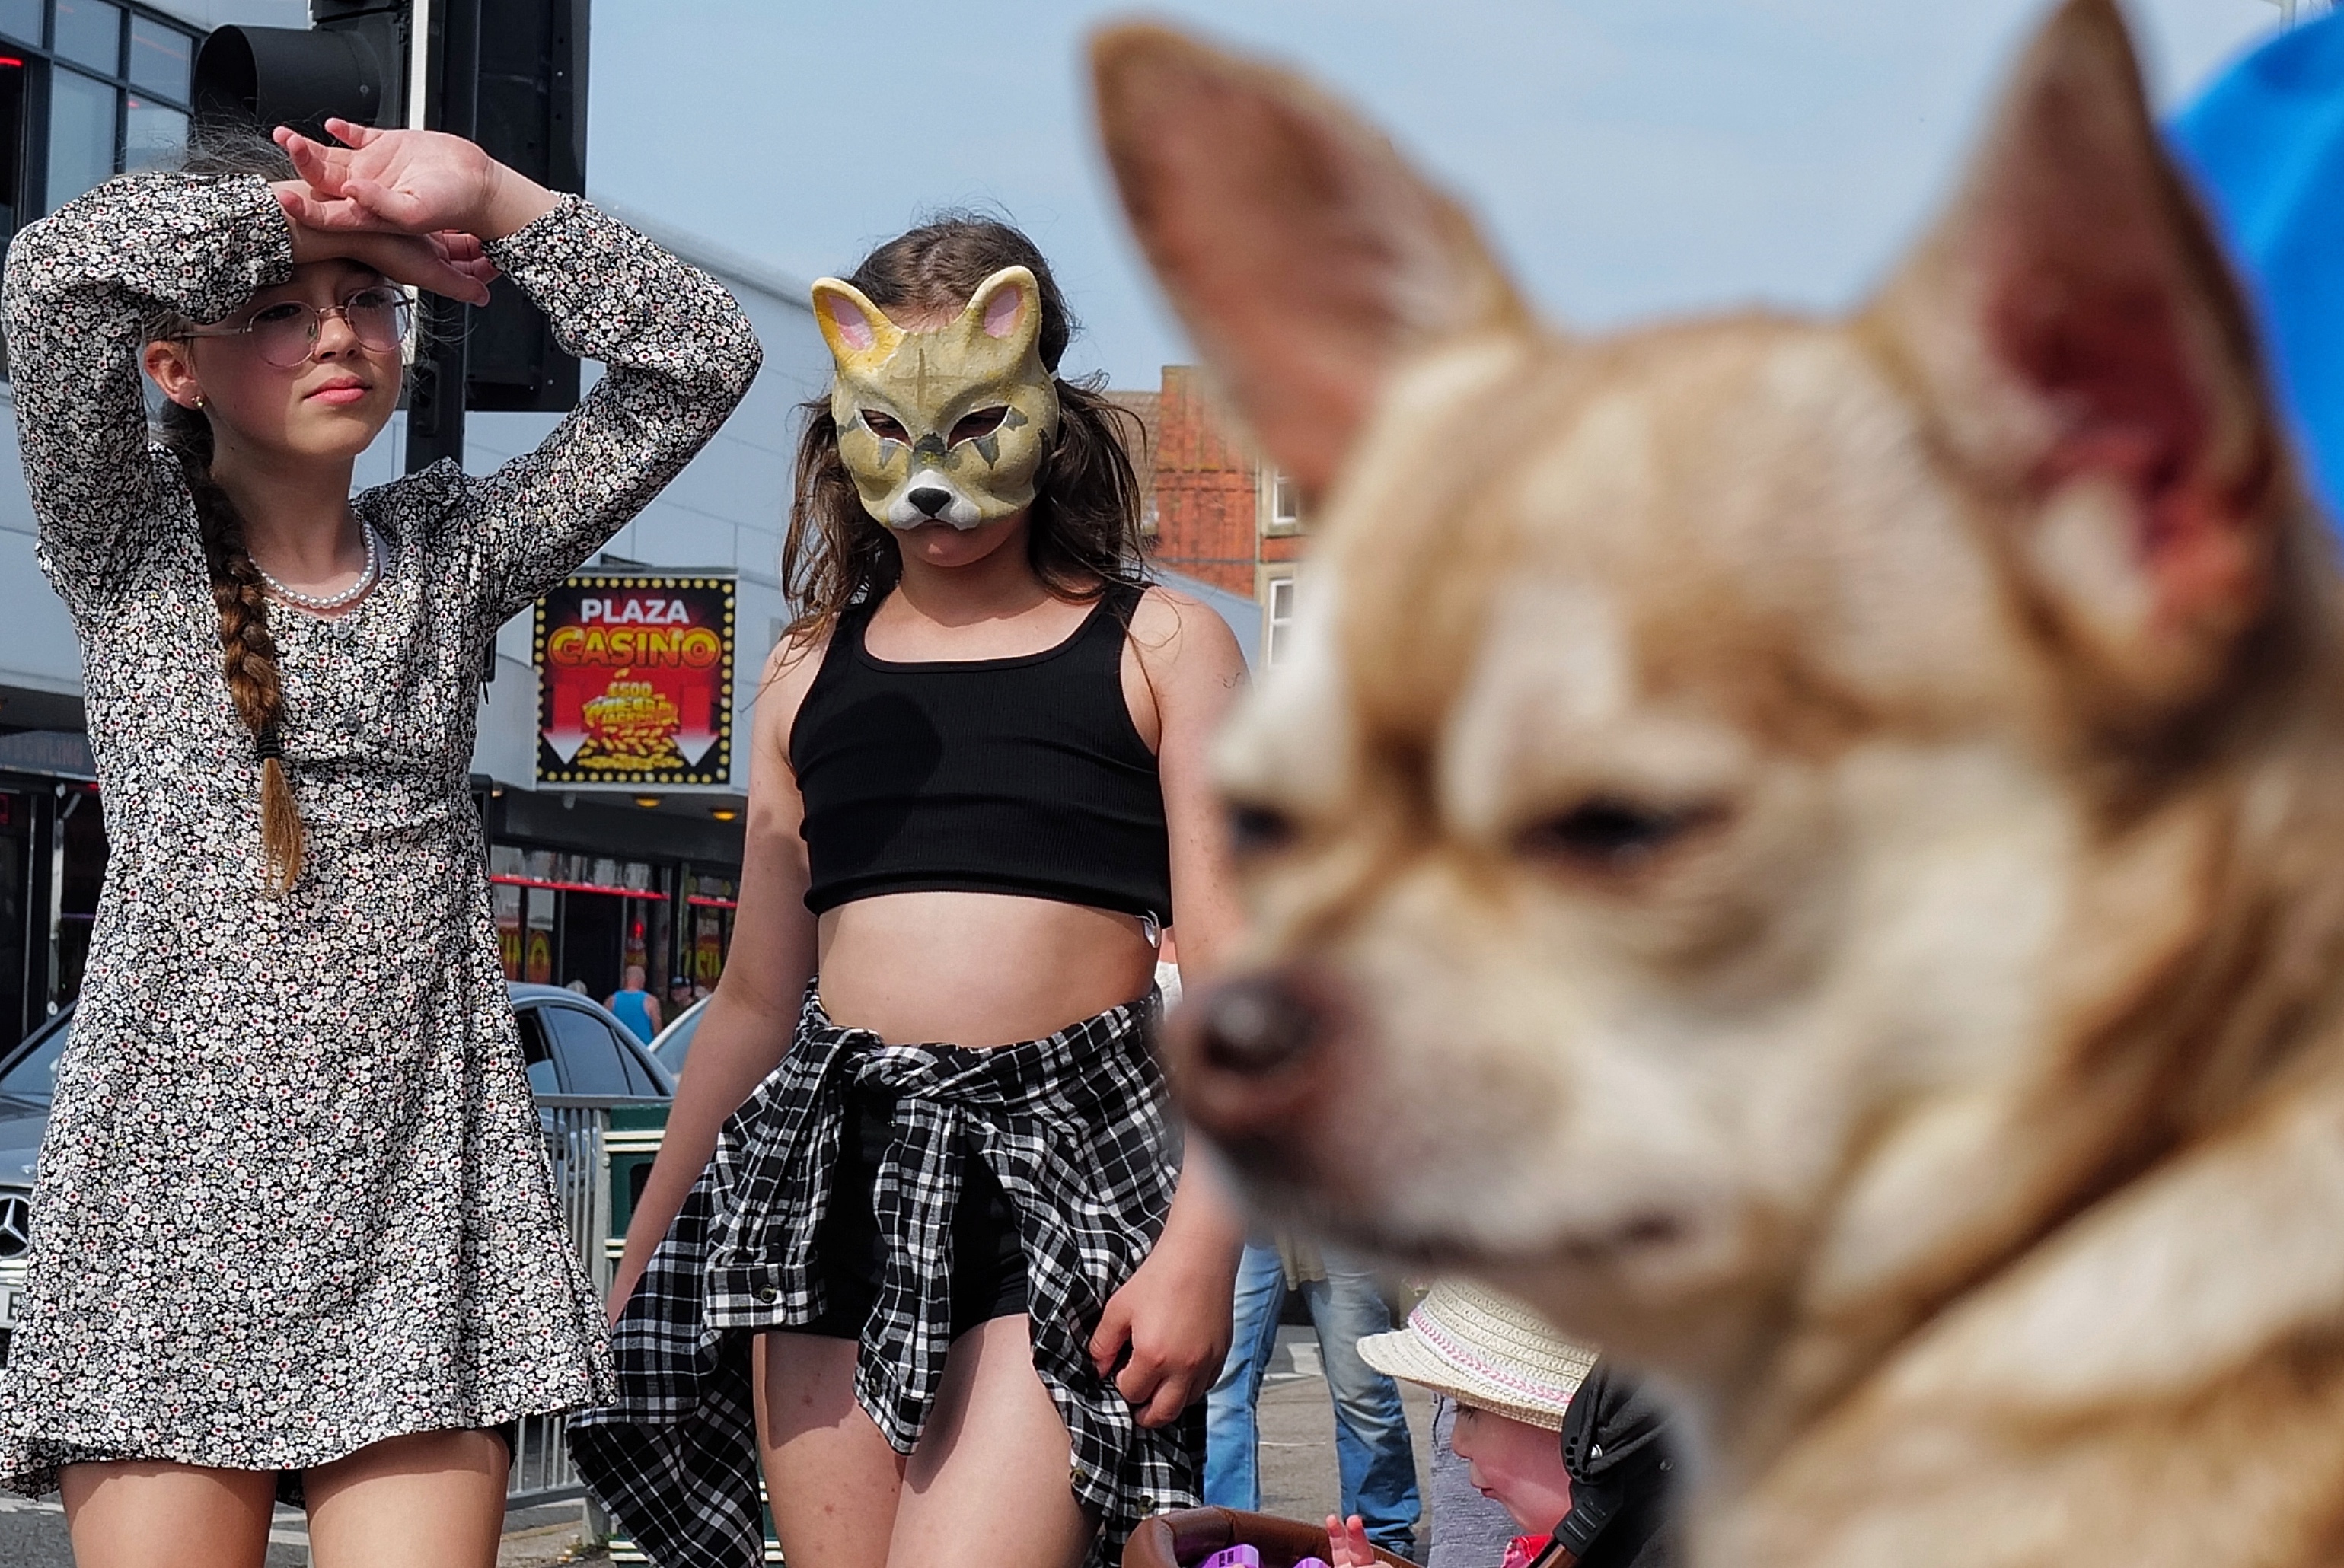 Street photo by steve gould skegness of girls and a dog  exhibition, Hildreds,  Skegnessgirl, fox, dog, seafront, mask, street photography, summertime, Lincolnshire